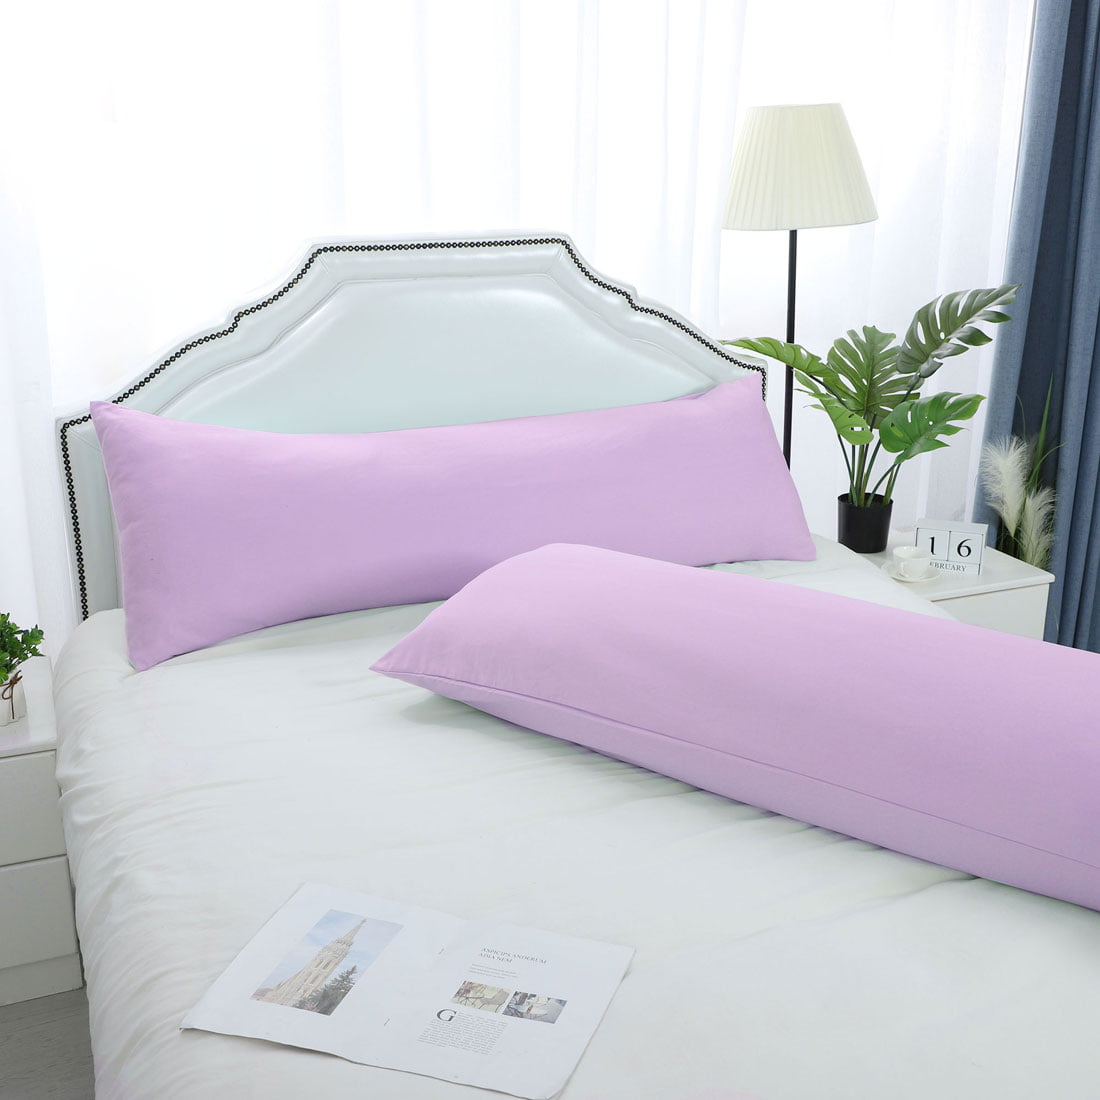 Set of 2 Body Pillow Cover Long Soft Pillow Case for Pillows Lilac 20"x60" 